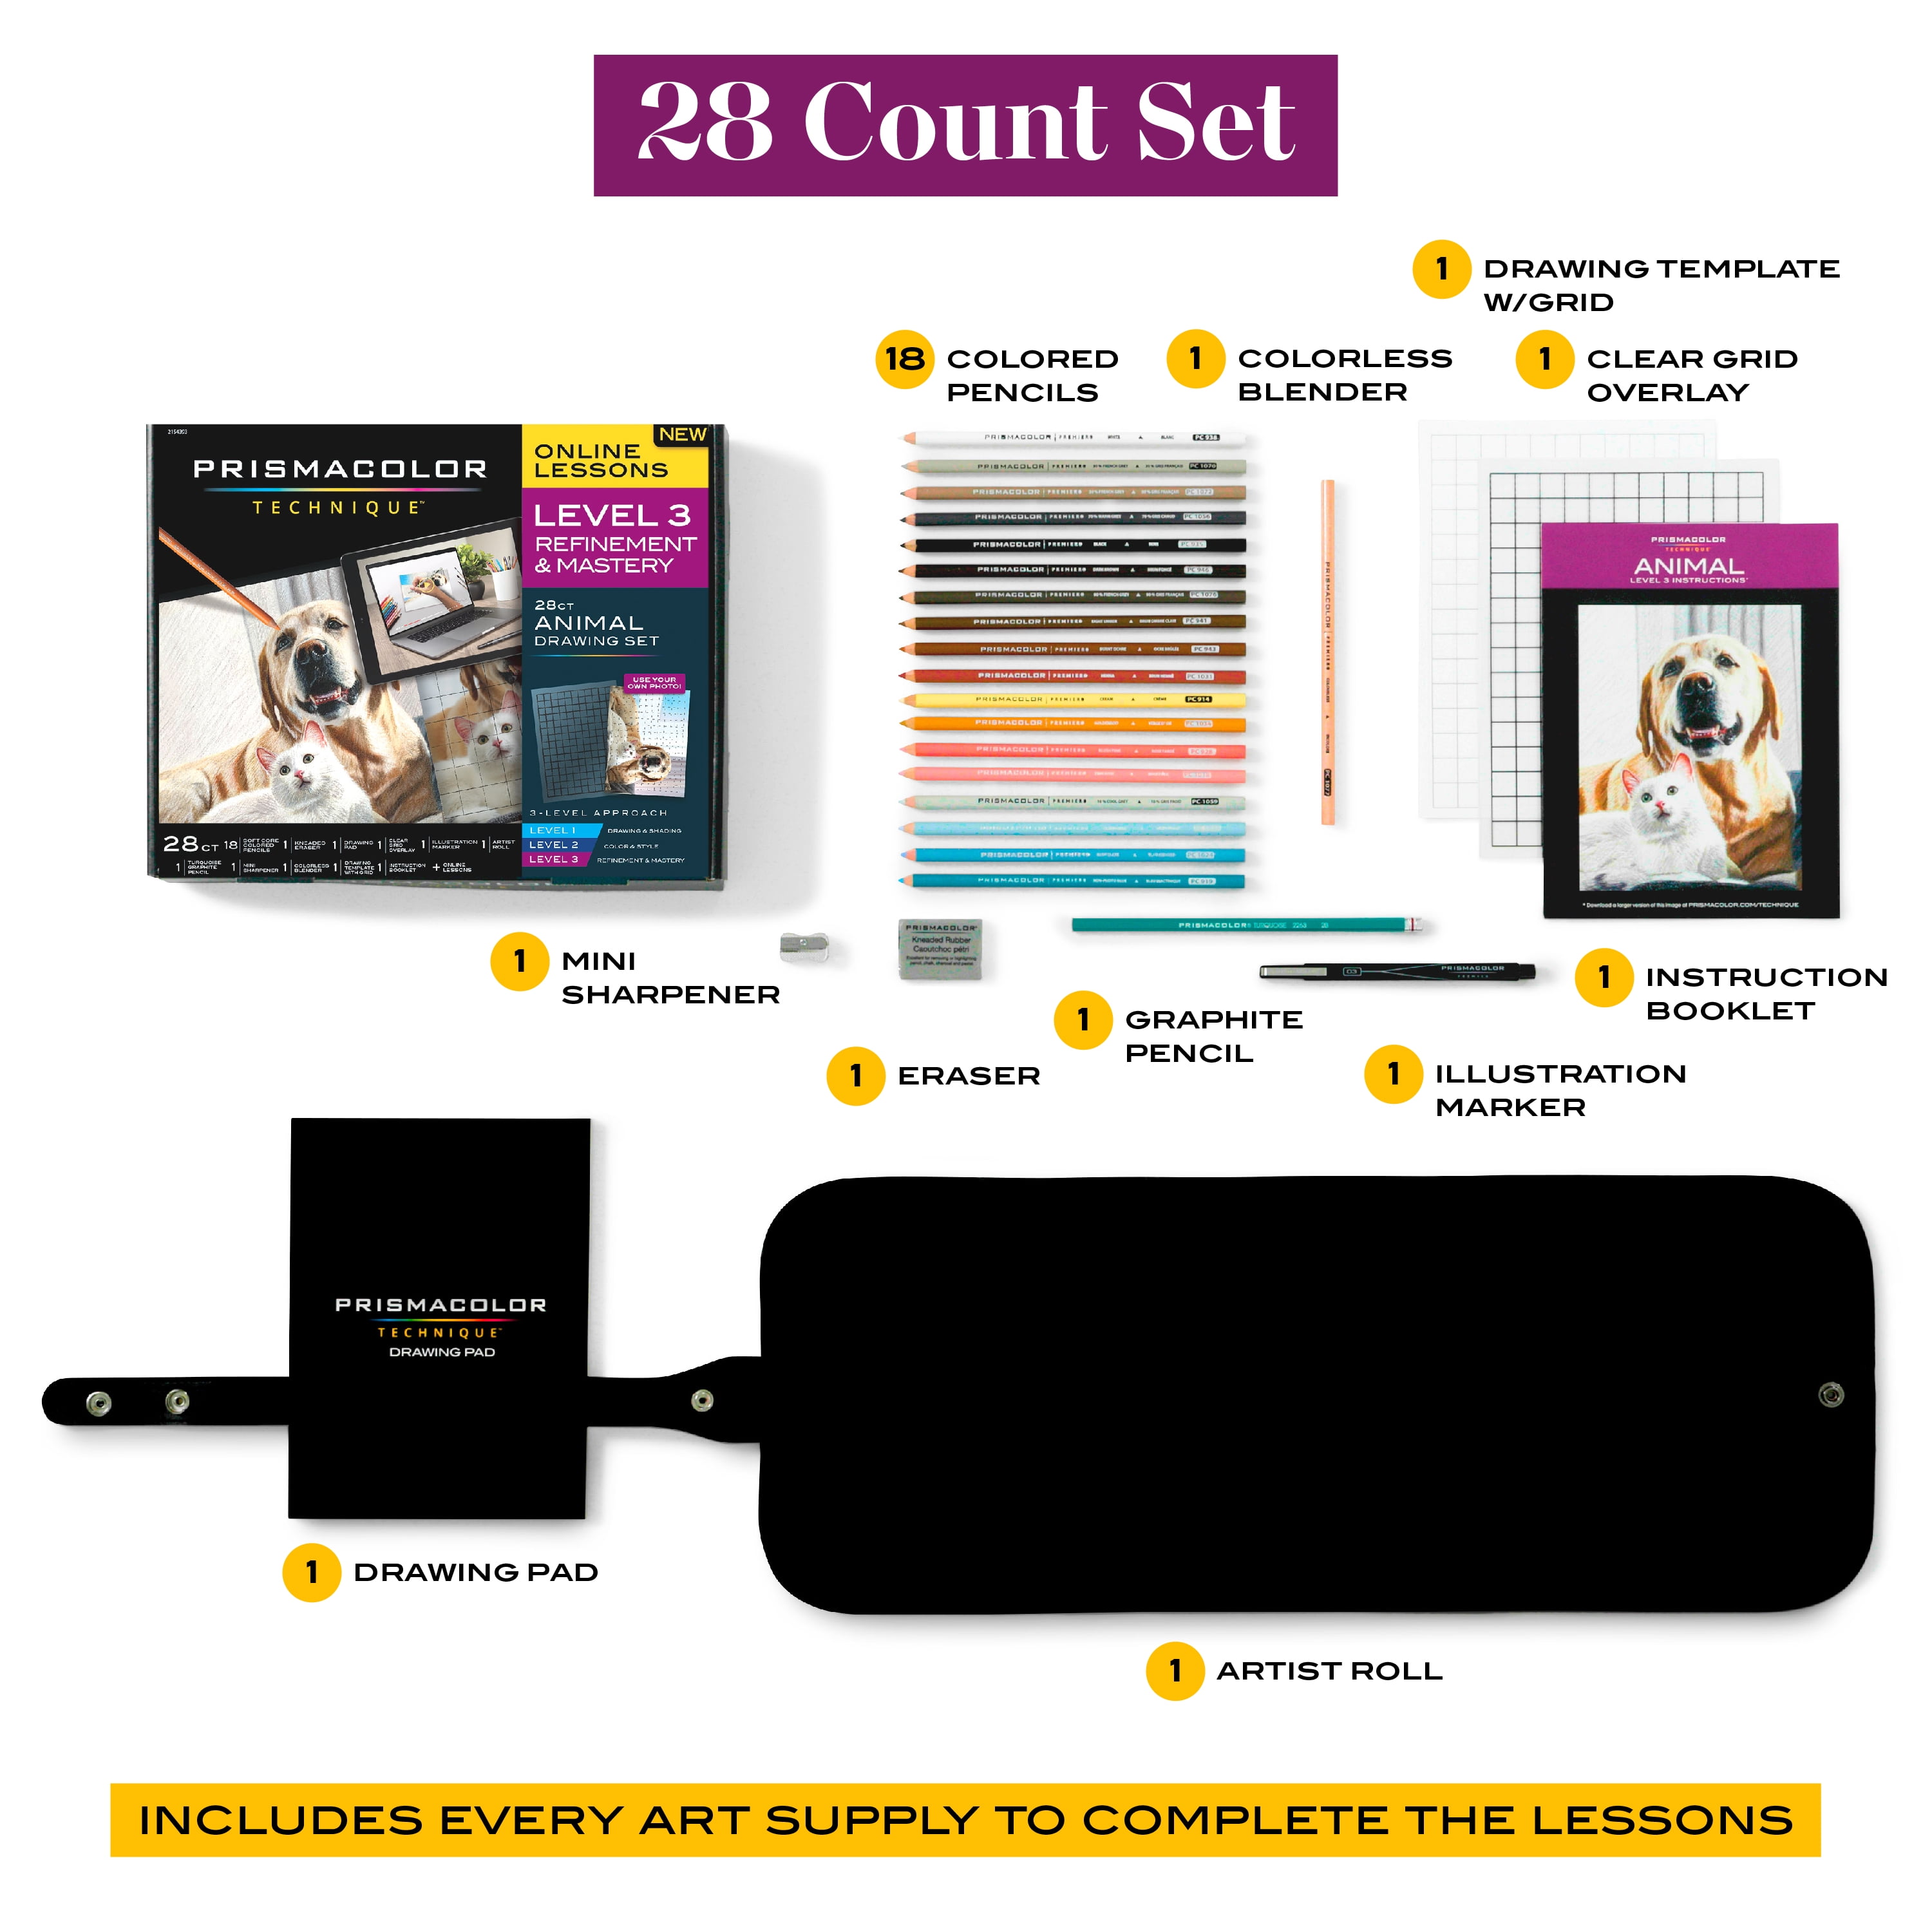  Prismacolor Technique, Art Supplies and Digital Art Lessons, Animal  Drawing Set Bundle, Levels 1-3, 54 Count : Arts, Crafts & Sewing